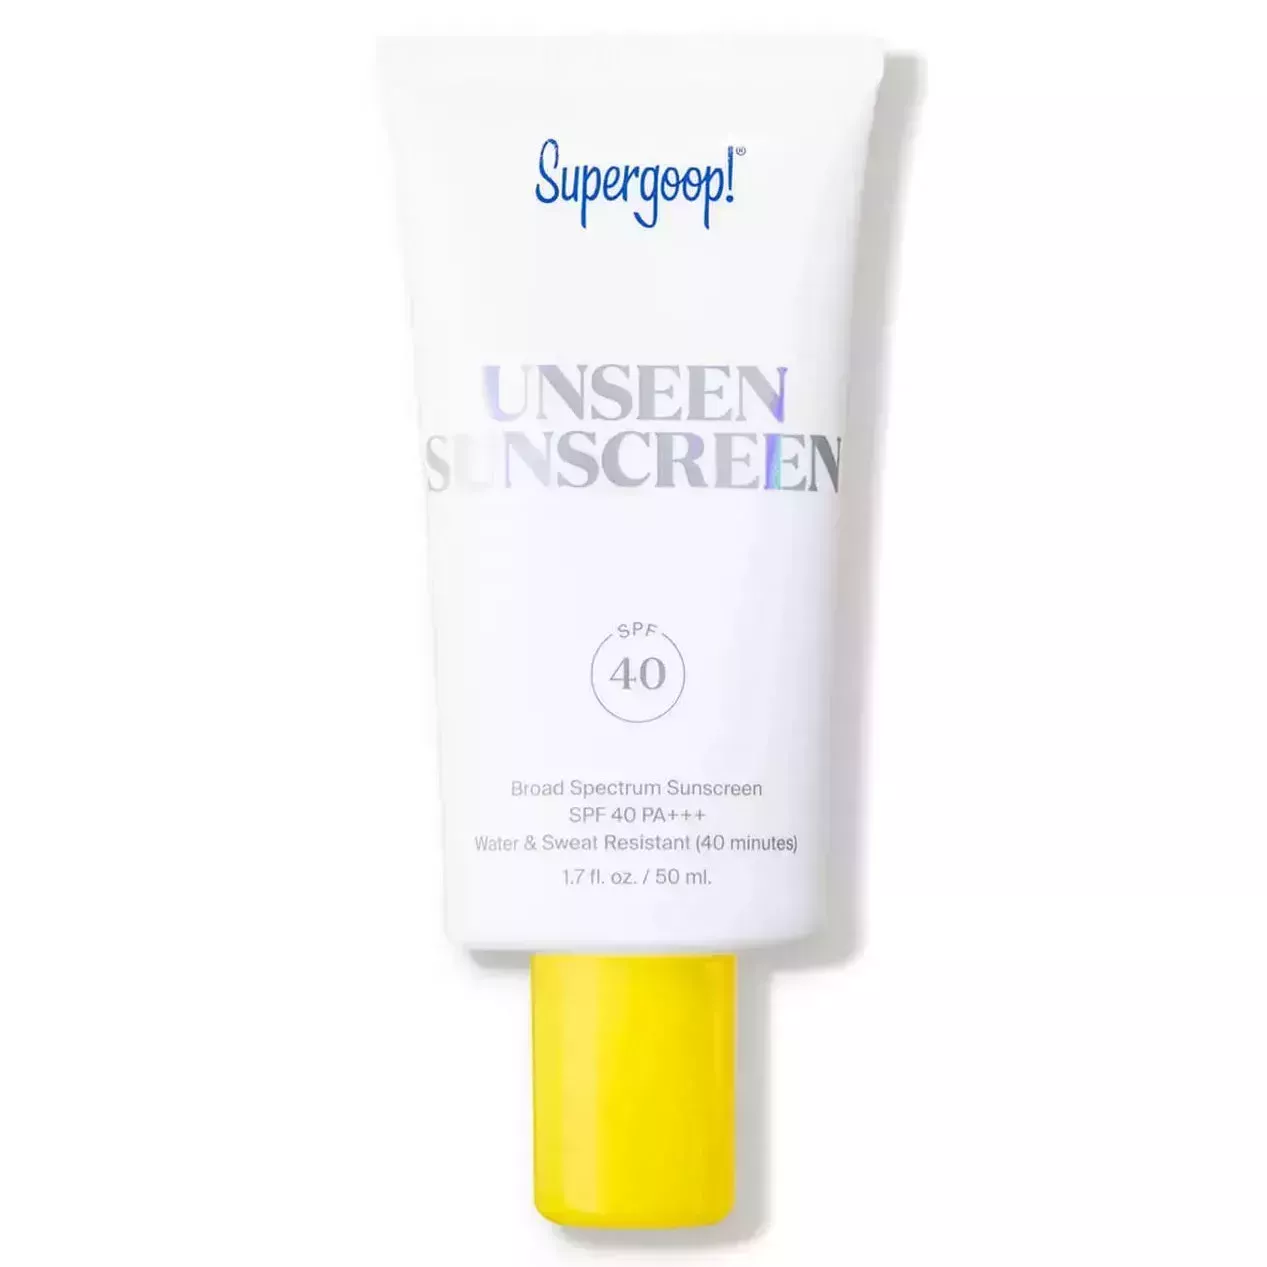 Supergoop Unseen Sunscreen SPF 40 flat white tube with yellow cap on white background